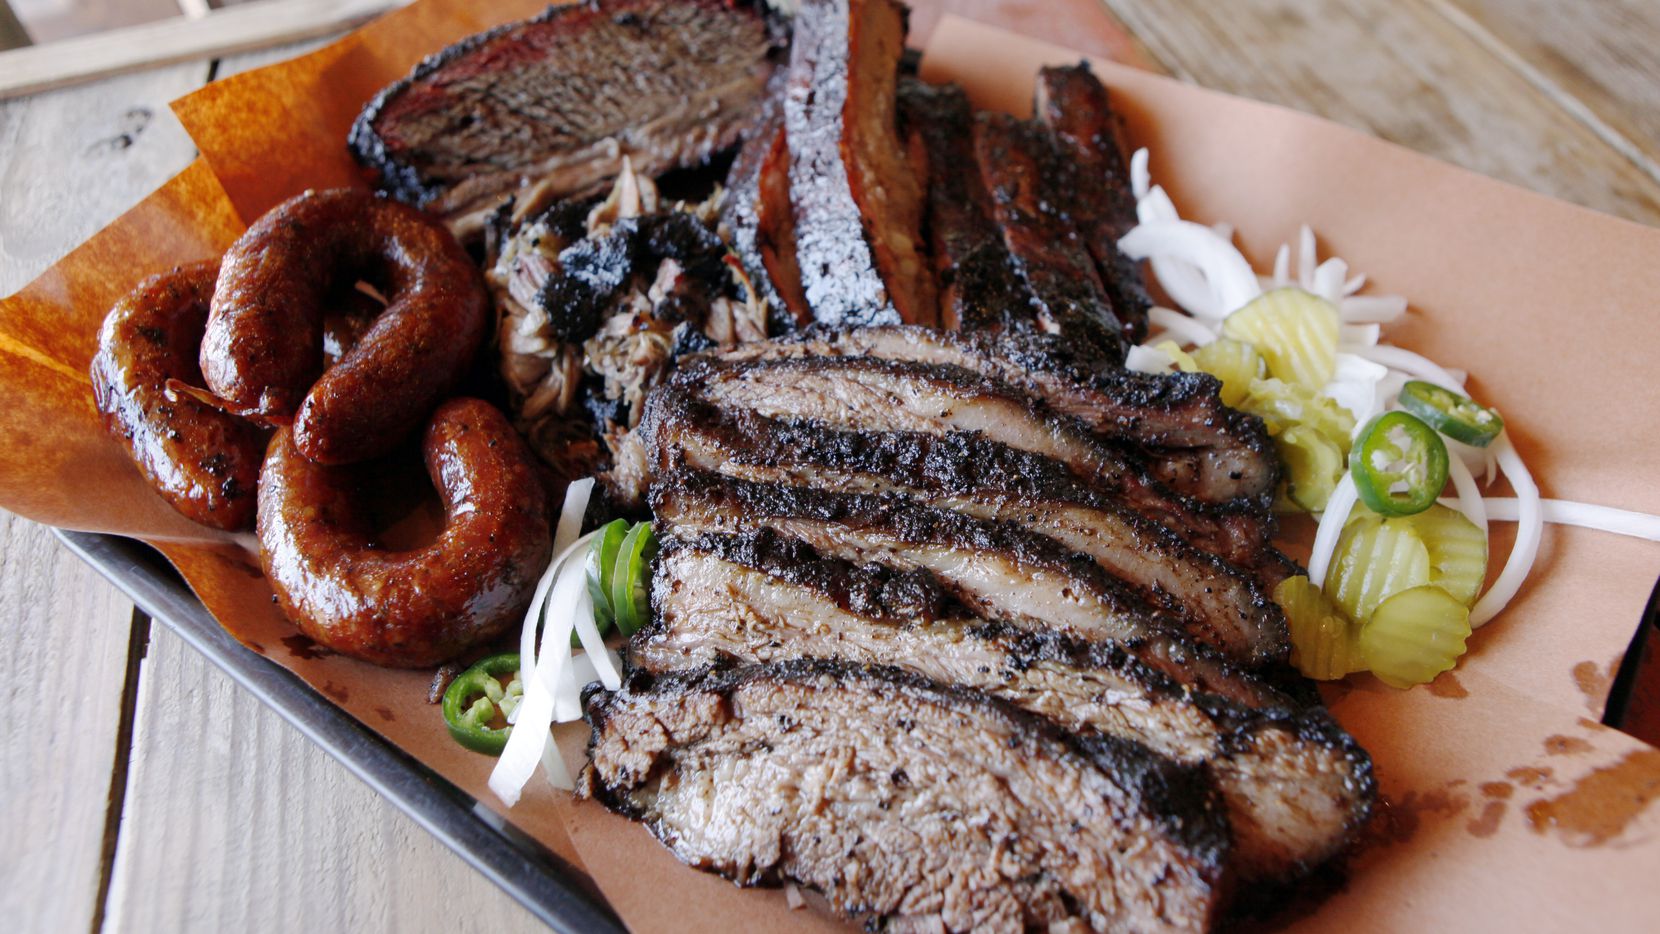 The family style platter with beef rib, brisket, pork ribs, pulled pork and sausage from the...